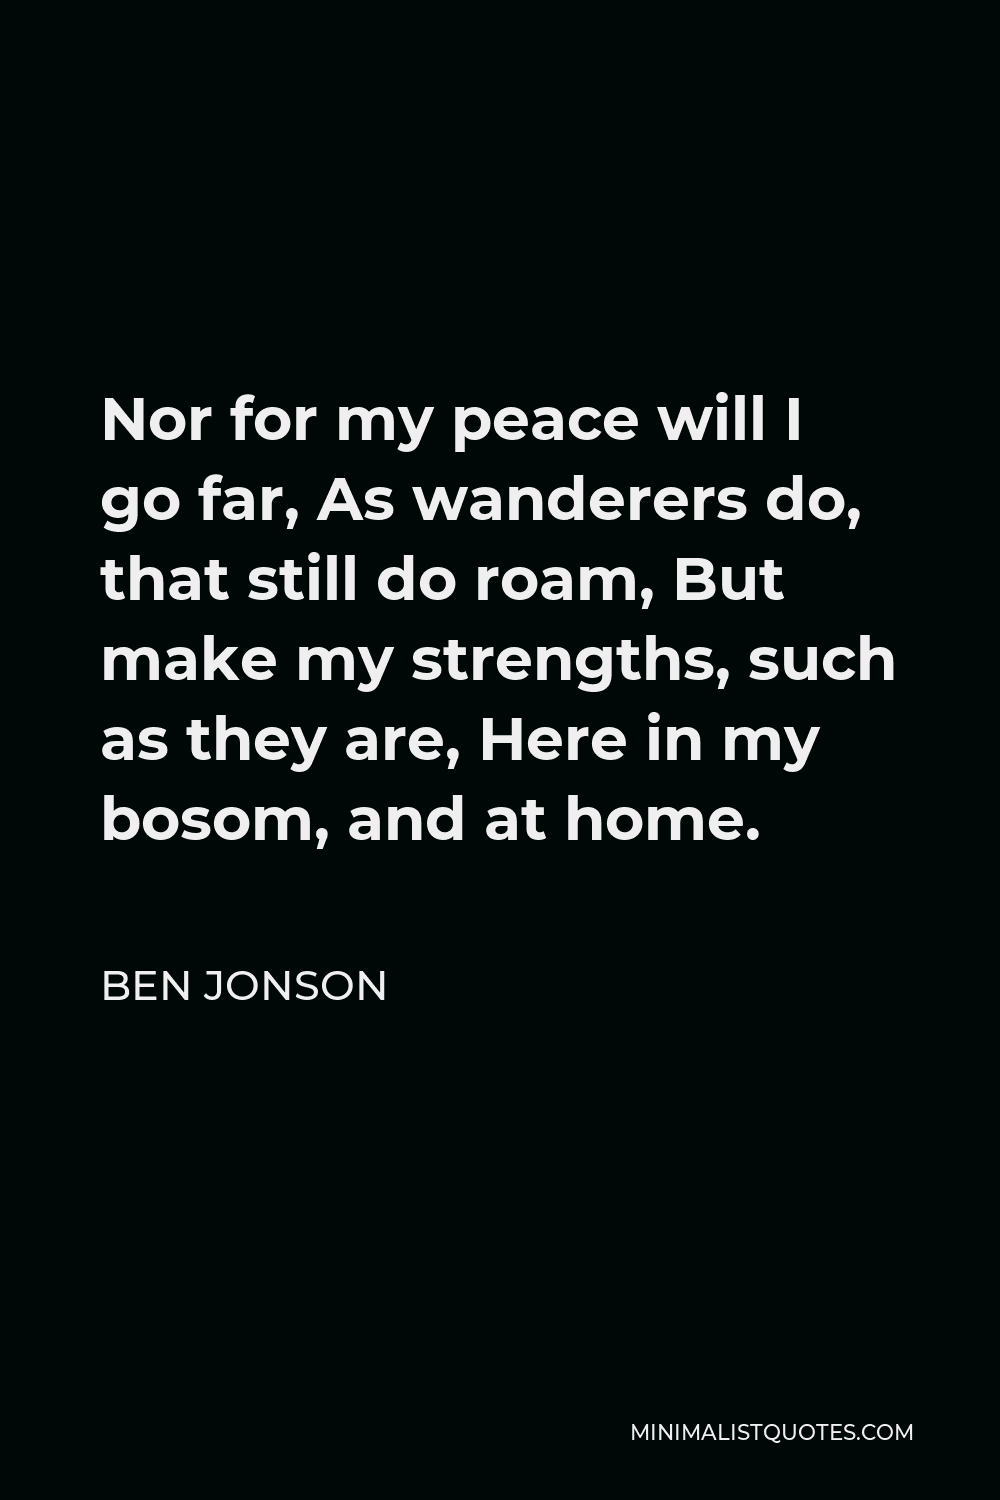 Ben Jonson Quote - Nor for my peace will I go far, As wanderers do, that still do roam, But make my strengths, such as they are, Here in my bosom, and at home.